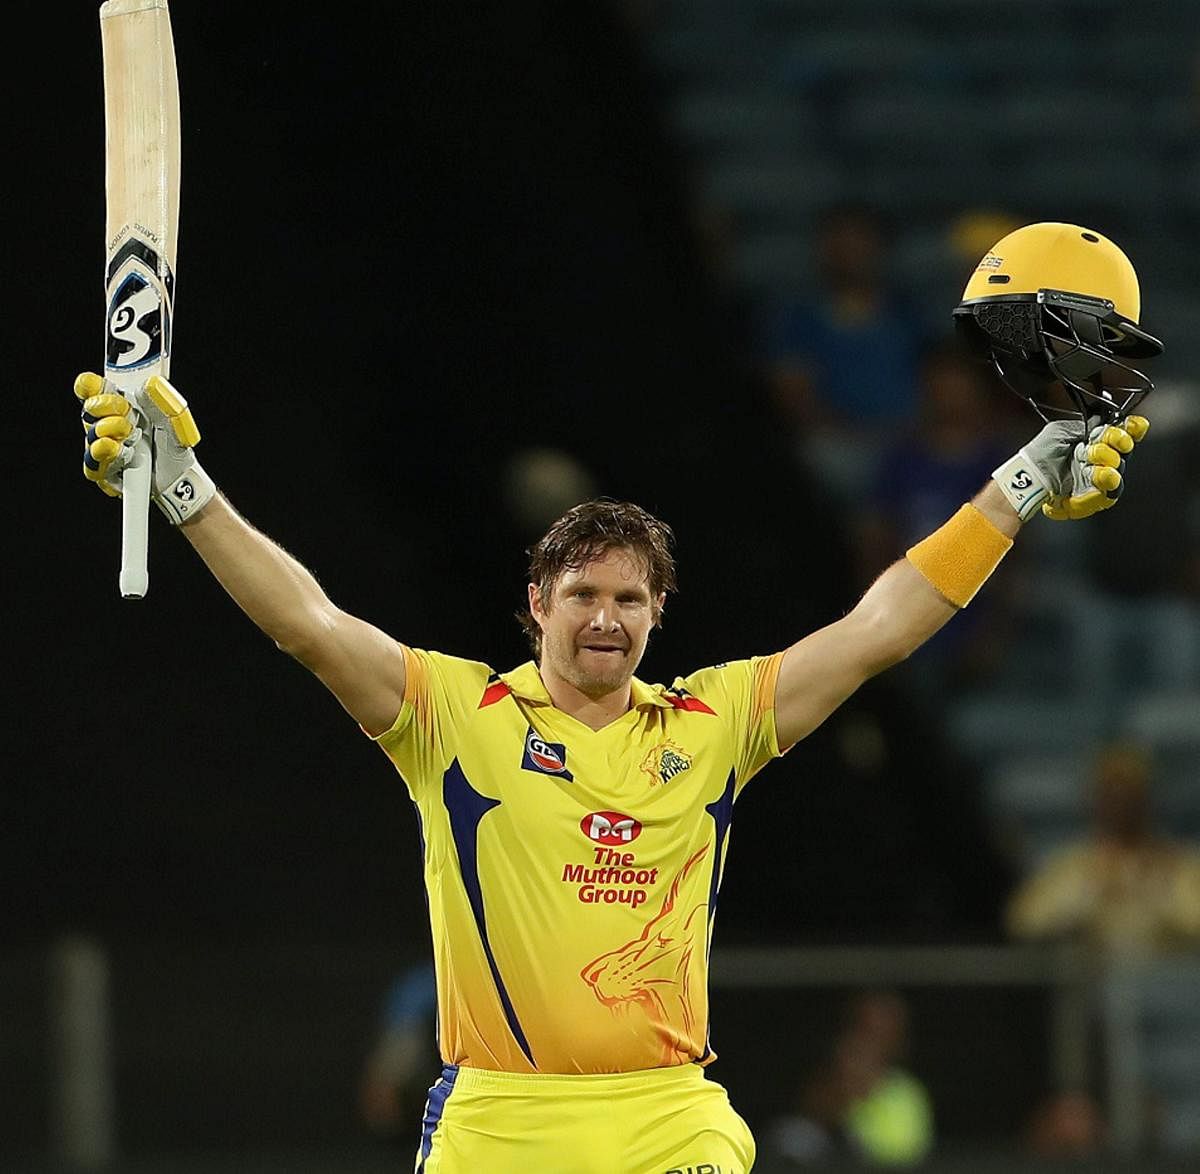 Shane Watson of the Chennai Superkings celebrates his century against Rajasthan Royals in Pune on Friday. PTI